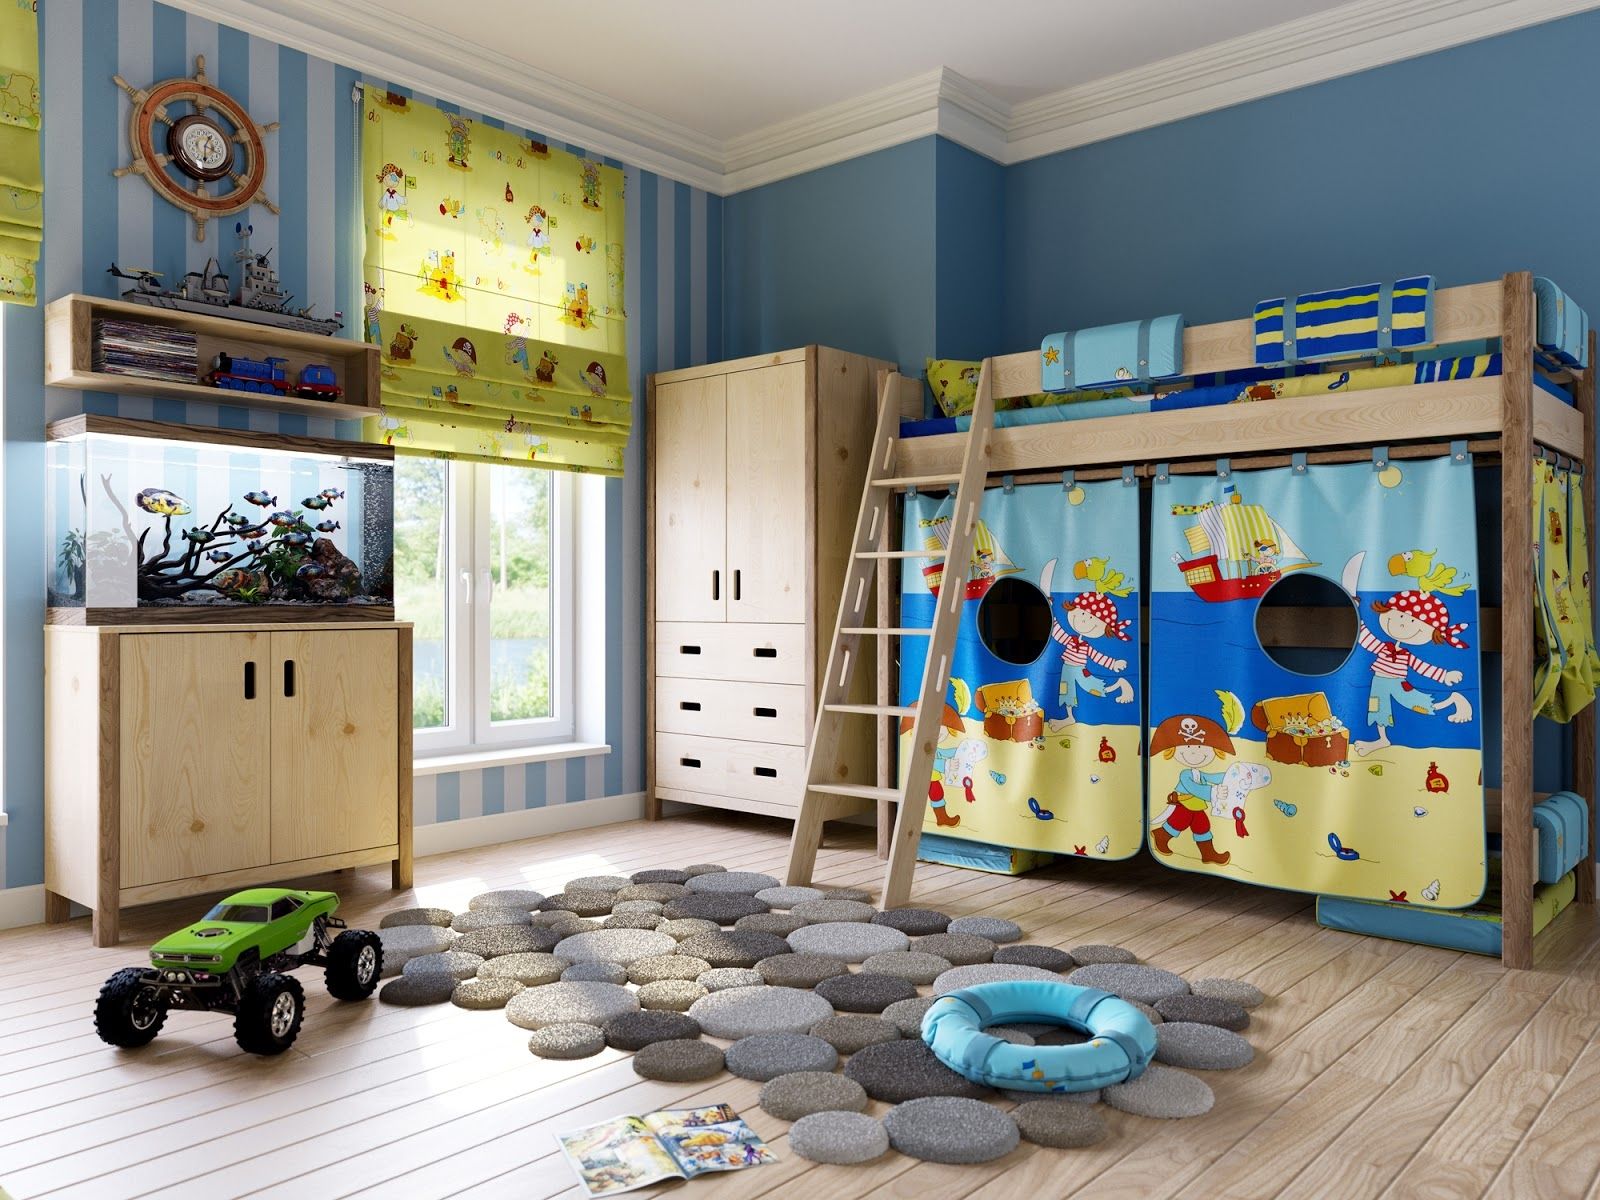 Kids Bedroom Furnitures Dazzling Kids Bedroom With Wooden Furniture Also Flooring Furnished With Unique Circle Kids Room Rugs In Stone Design Color And Completed With Bunk Bed Plus Cupboard Kids Room Kids Room Rugs: Between Classic And Modern Style